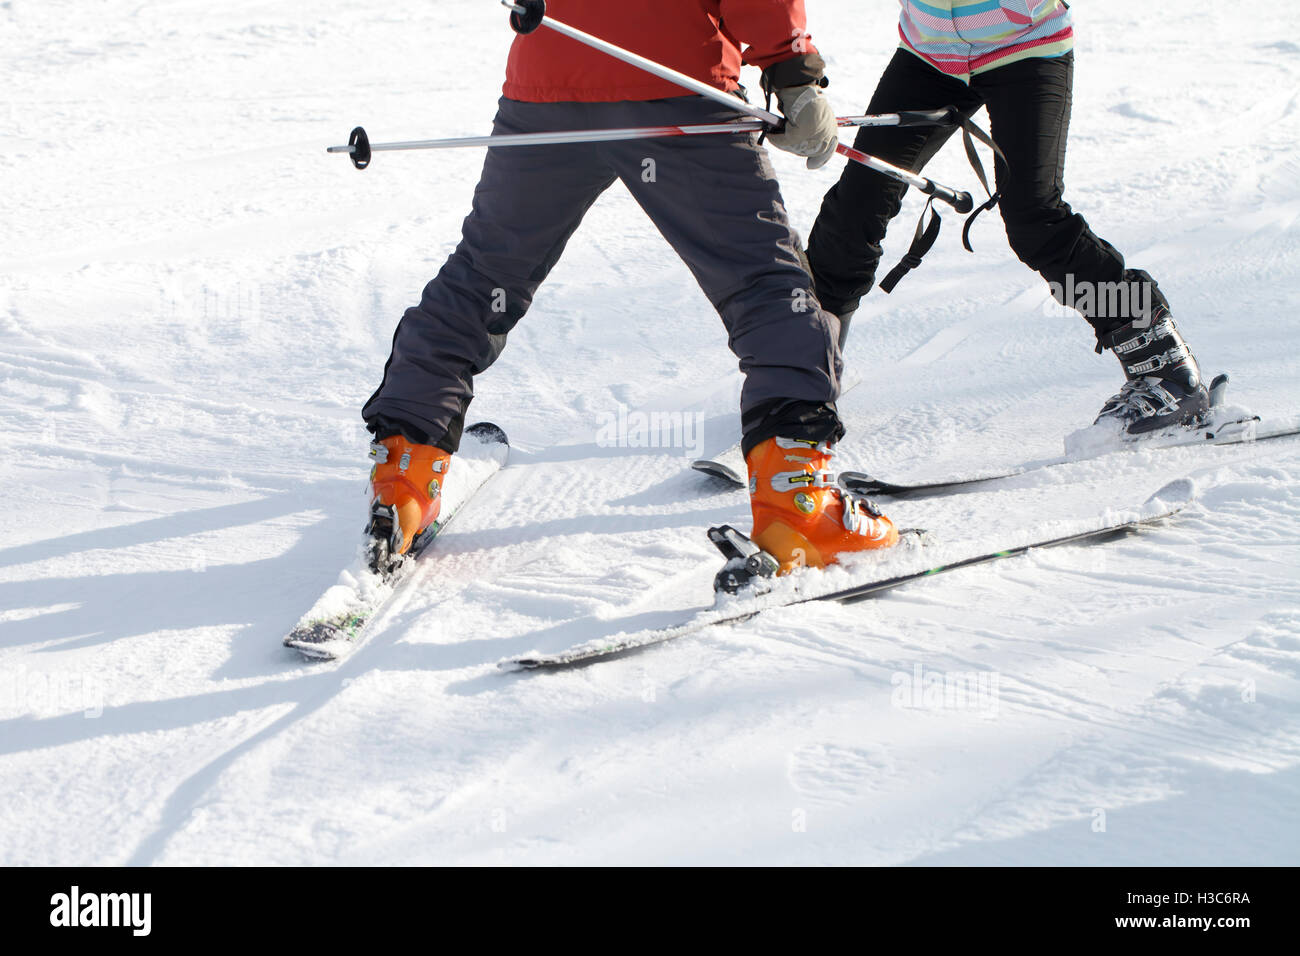 The instructor teaches Woman skiing, winter recreation Stock Photo